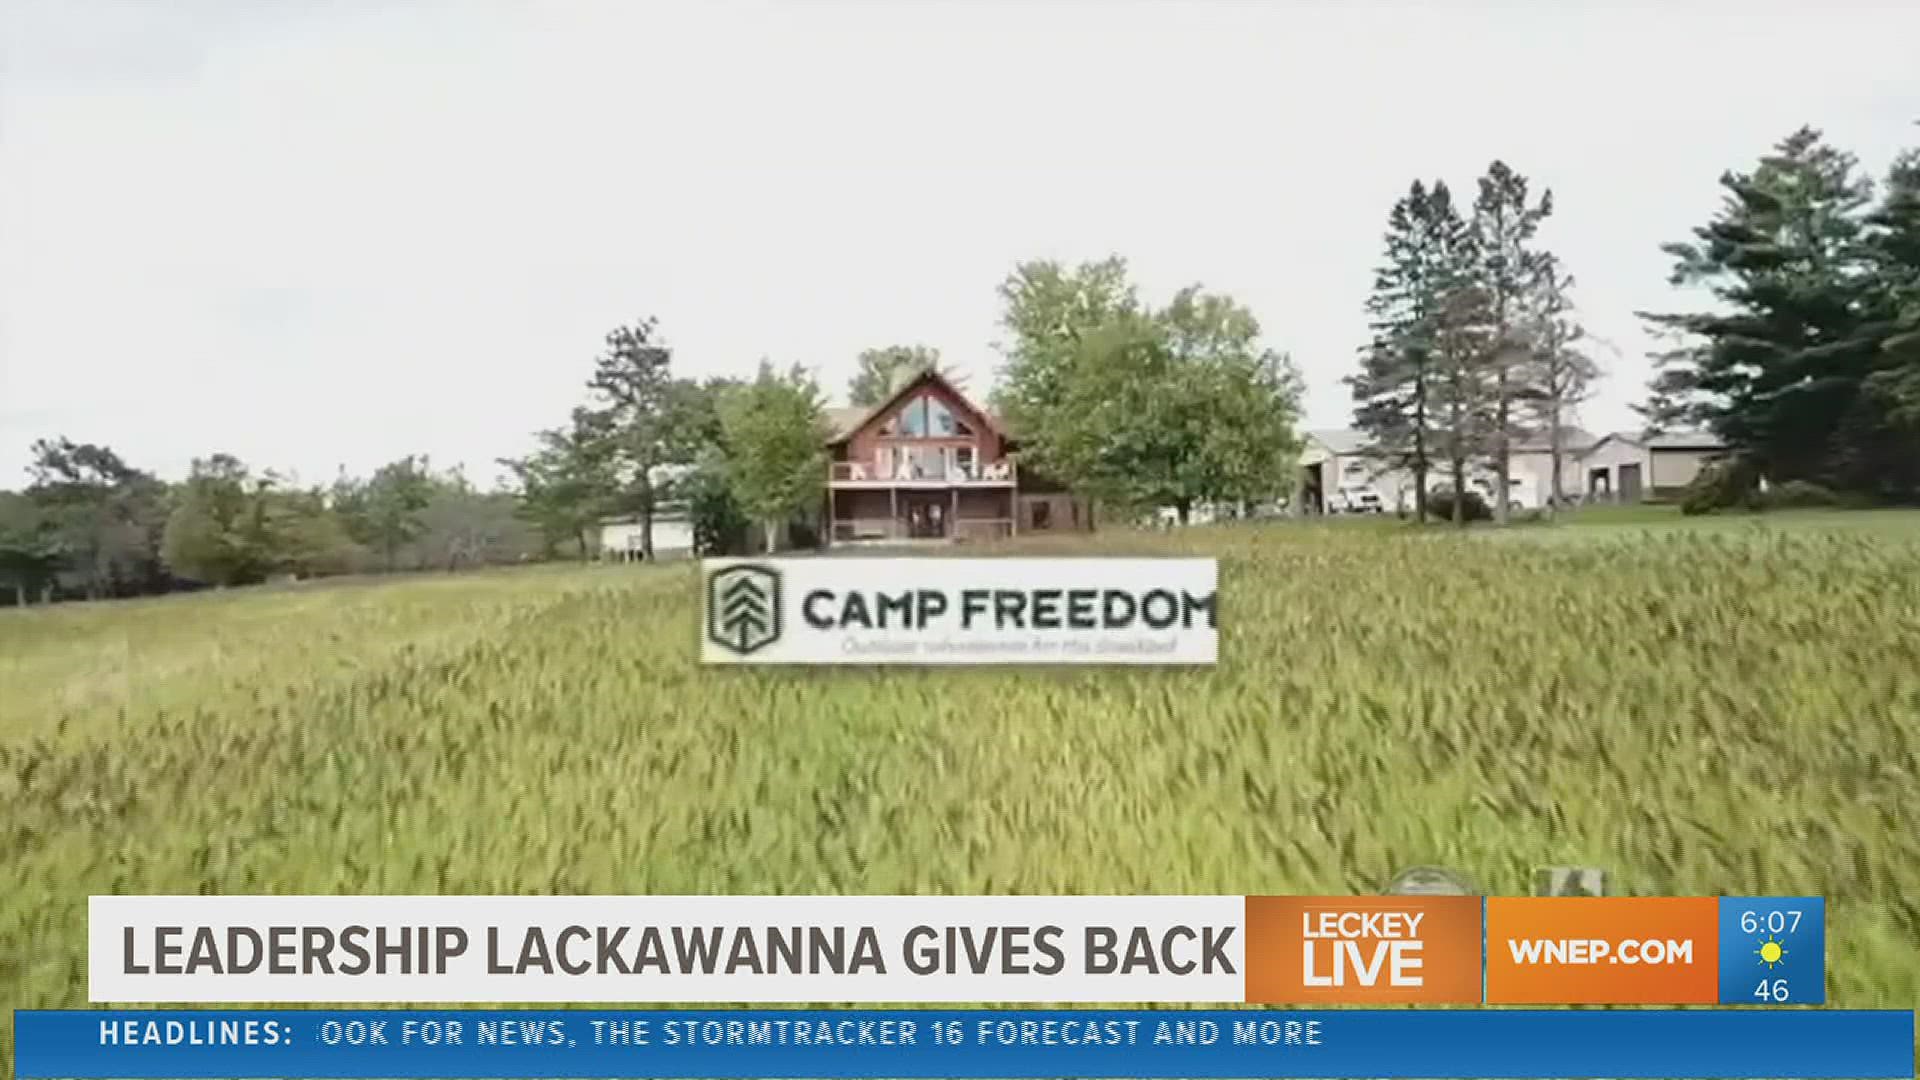 Area business professionals are hosting a weekend event to help people improve the grounds at Camp Freedom.